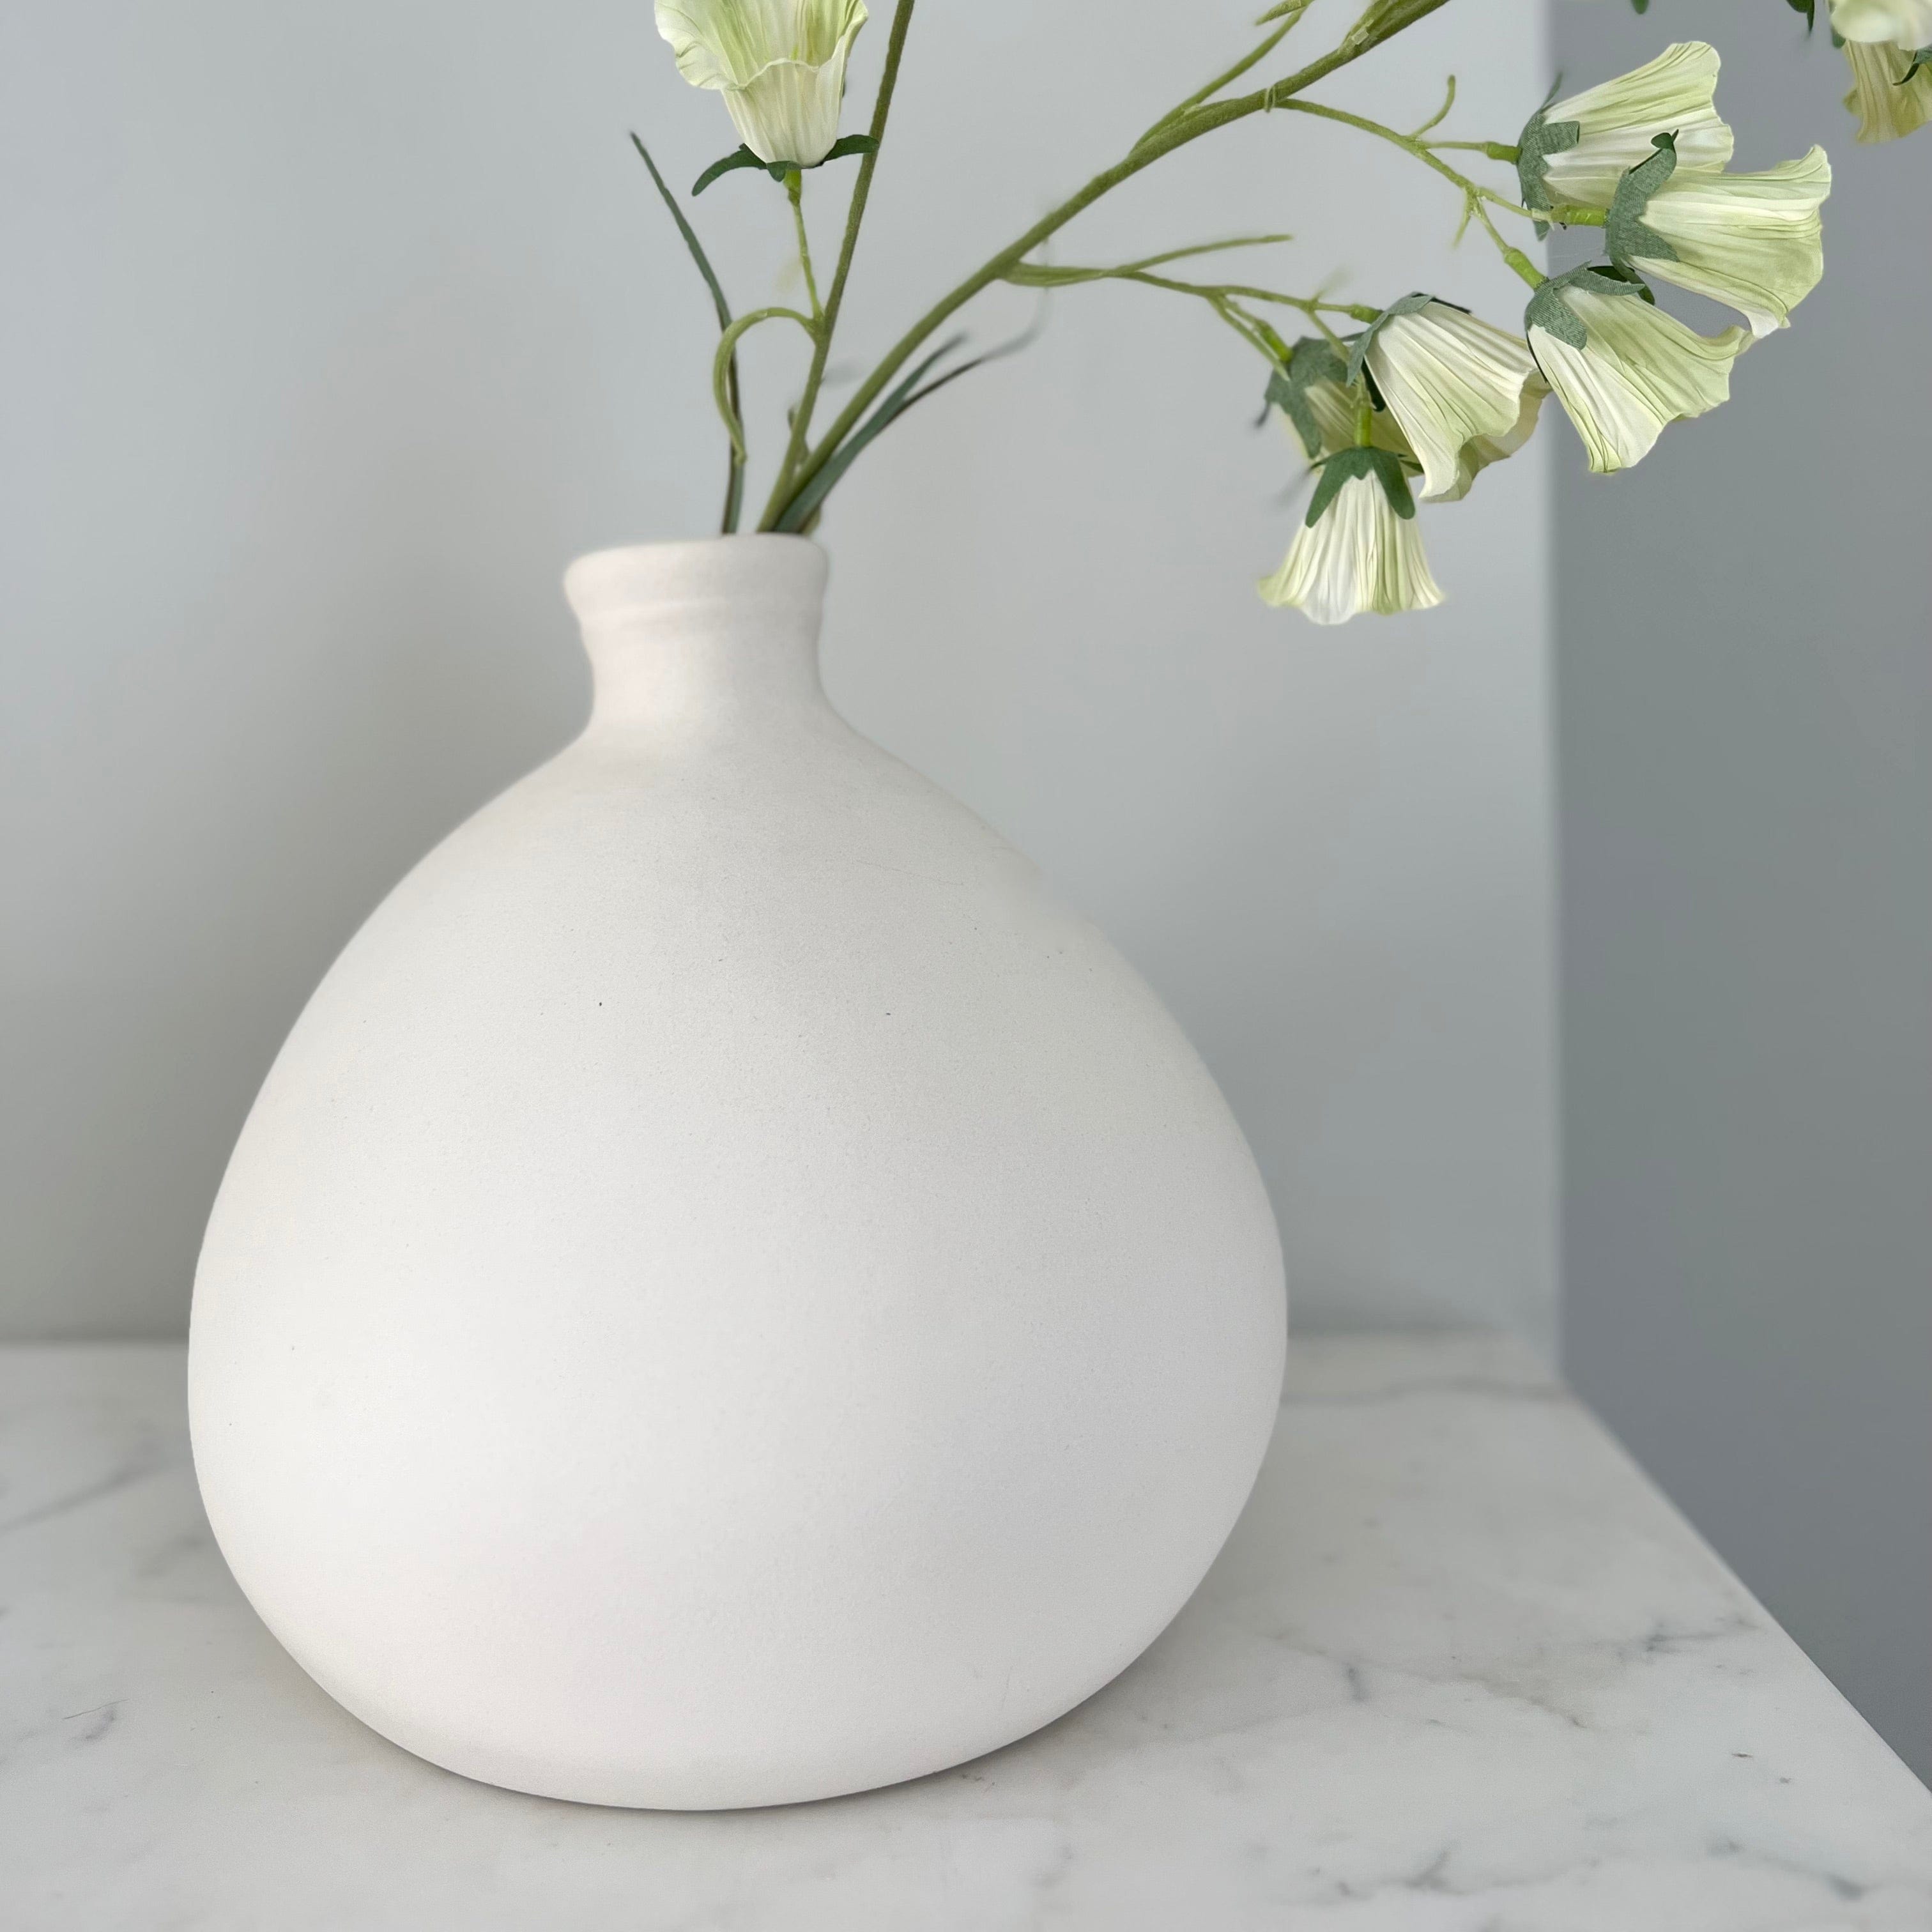 Artificial Flowers in Vase Stylish Vases White Burford Vase Home Decor and Accessories The Faux Flower Company UK ABP1747